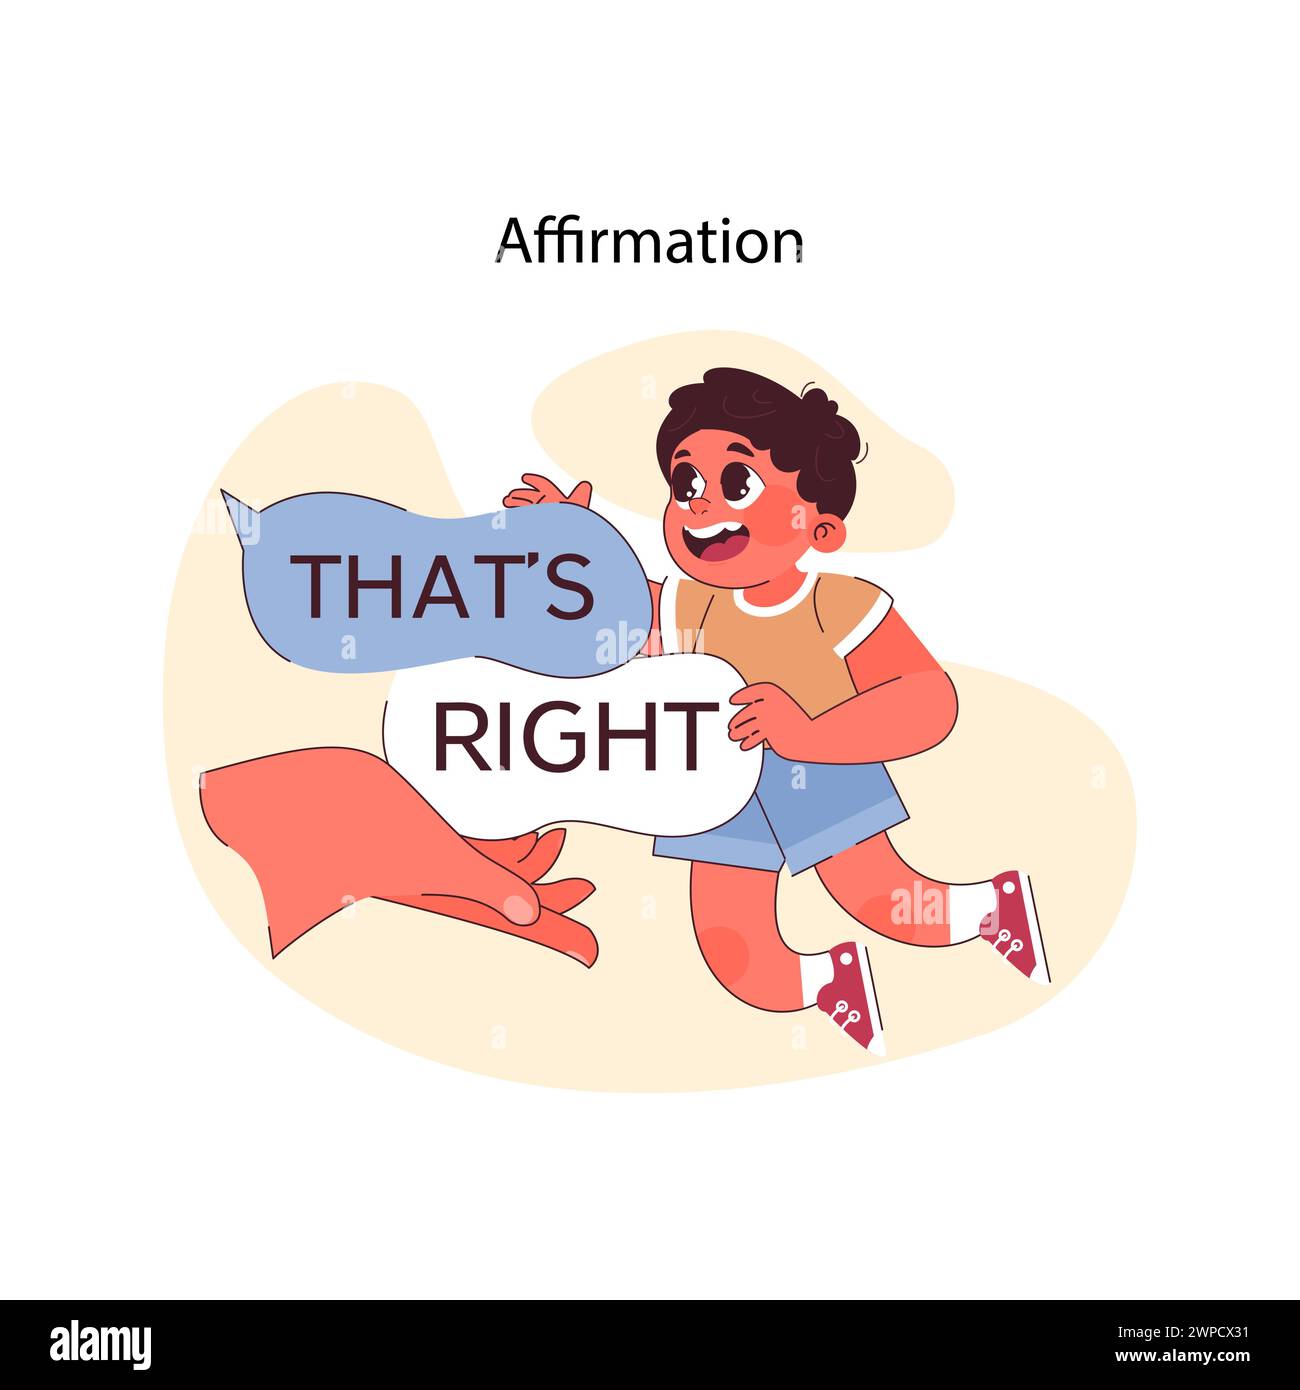 Affirmation concept. Delighted boy holding supportive speech bubble, given by hand of grownup. Positive reinforcement, joyful agreement. Feeling validated and understood. Flat vector illustration. Stock Vector